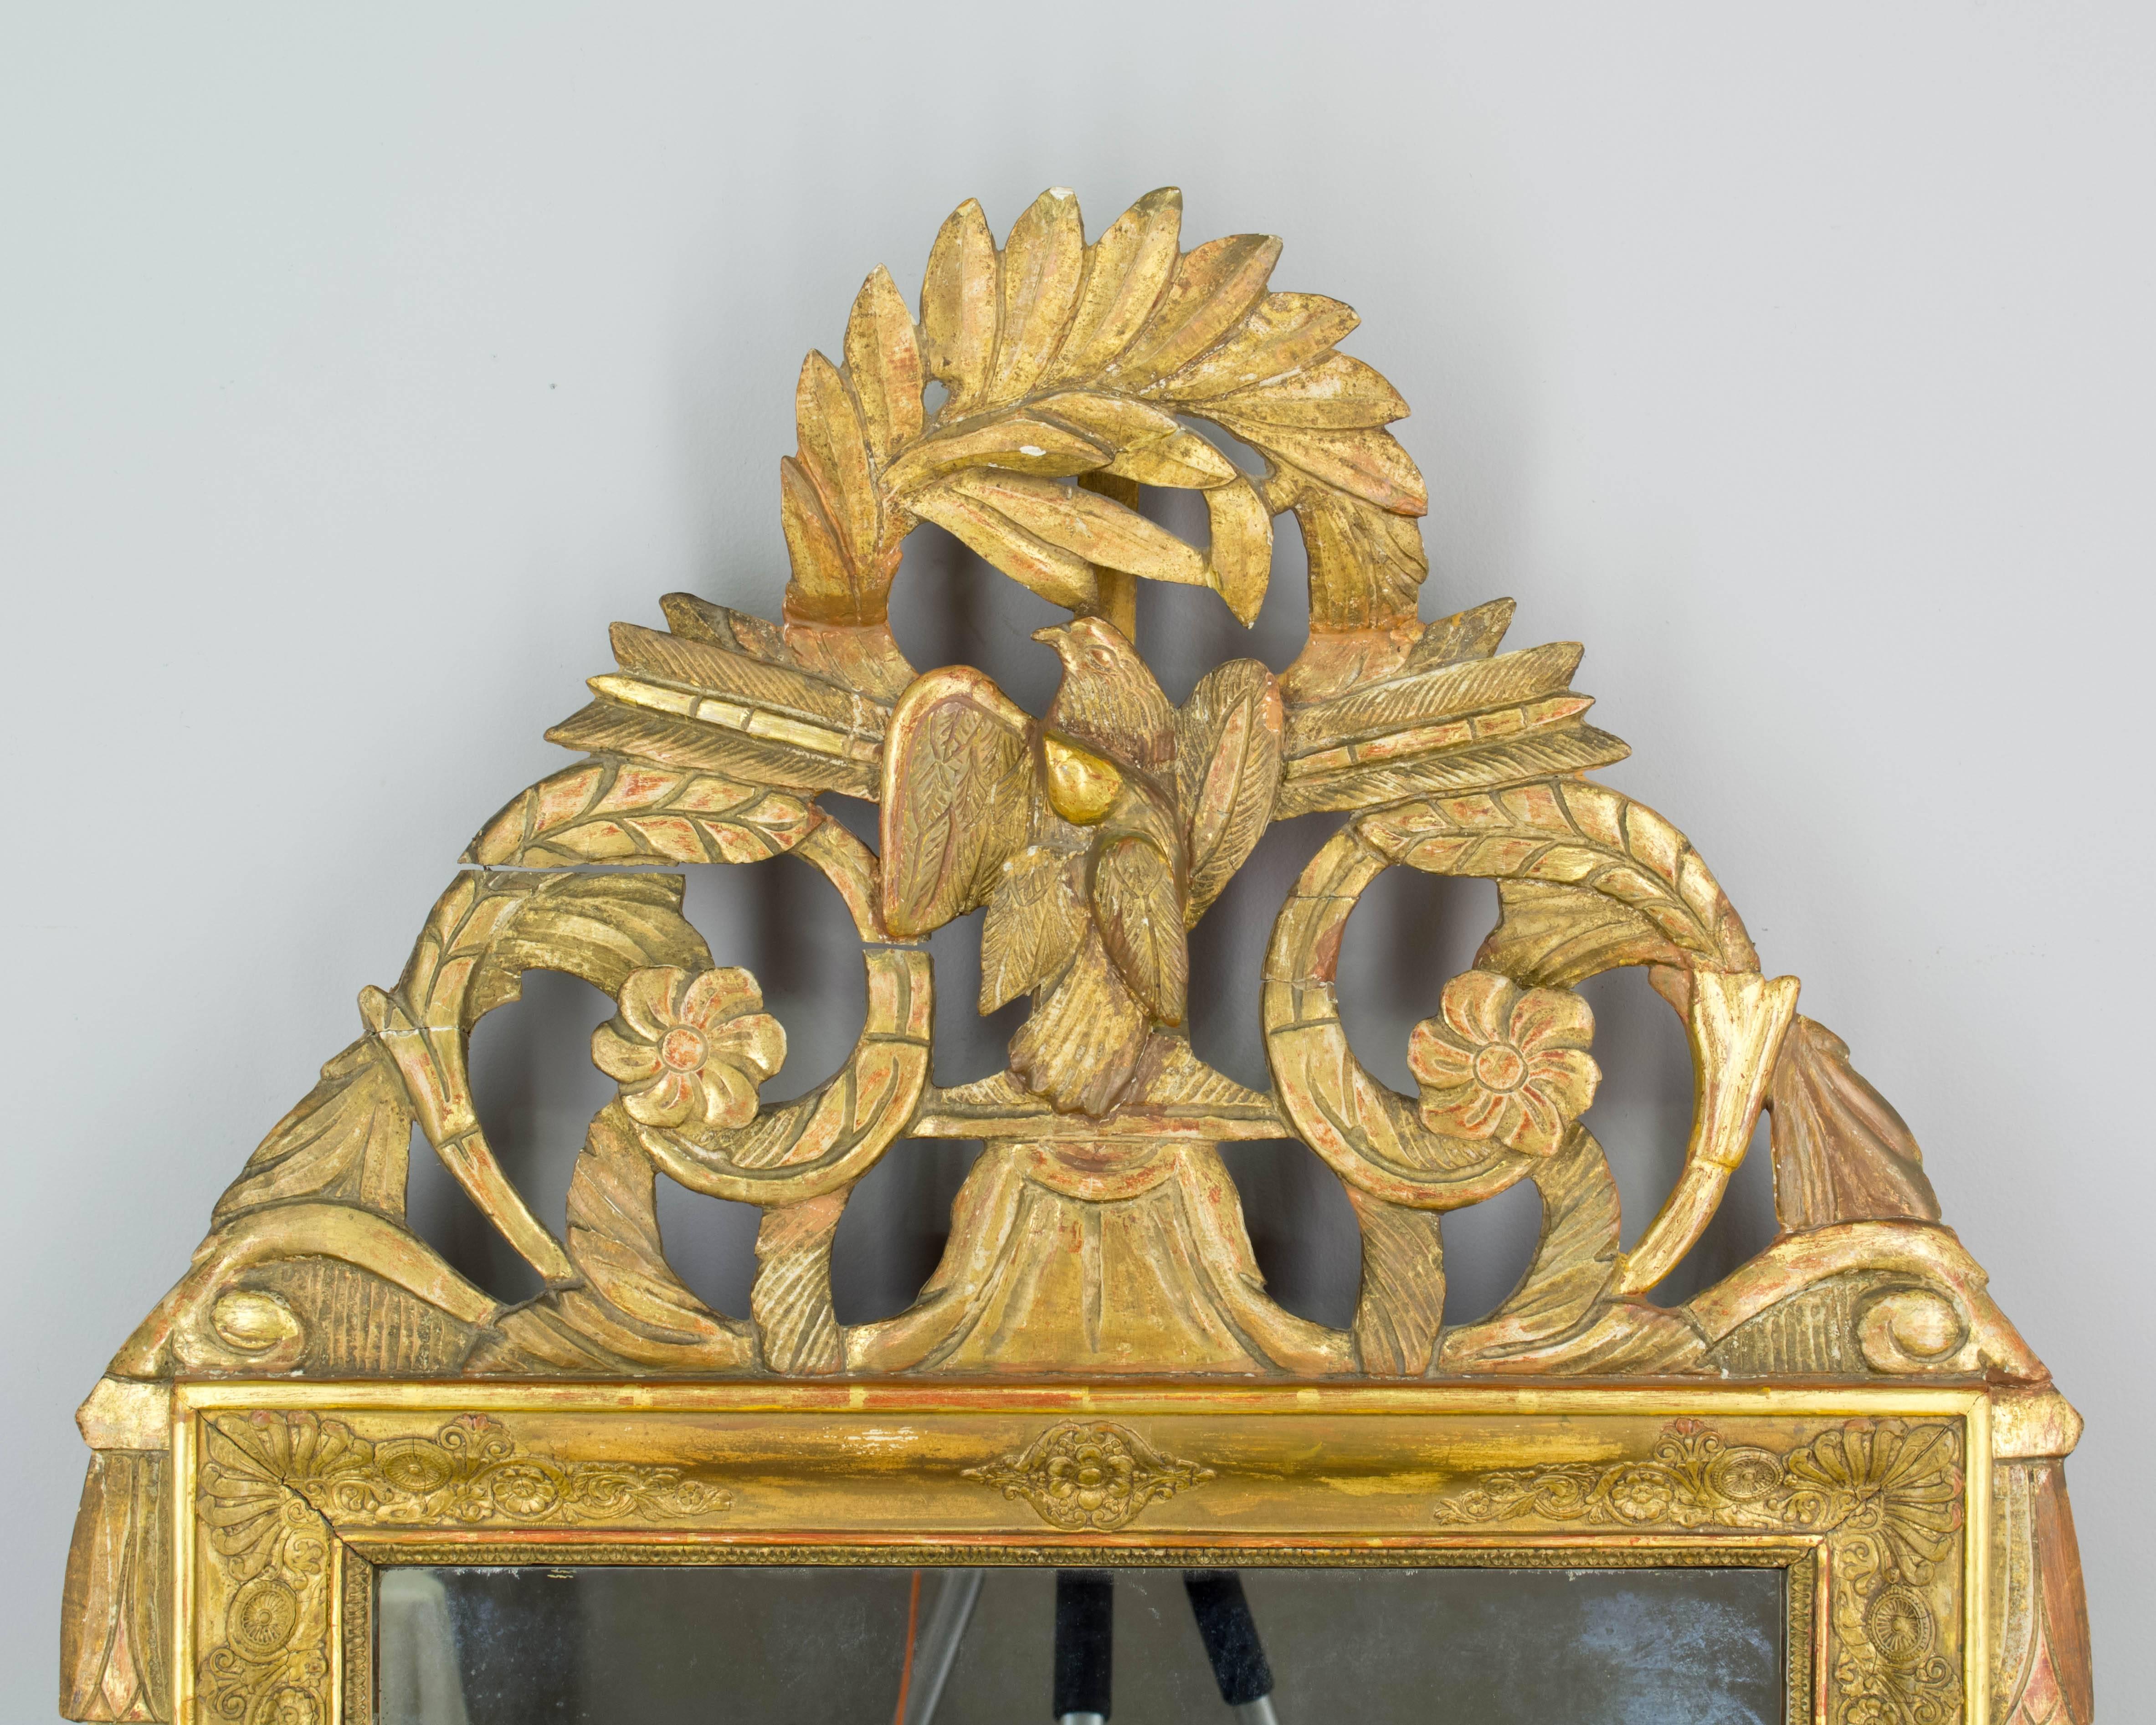 19th century Louis XVI style Provençal bridal mirror with gilt and gesso frame. Beautiful carved wood crest with lovebirds and floral decoration. Original looking glass with old silvering. Bottom right decoration has been replaced. Crest has natural